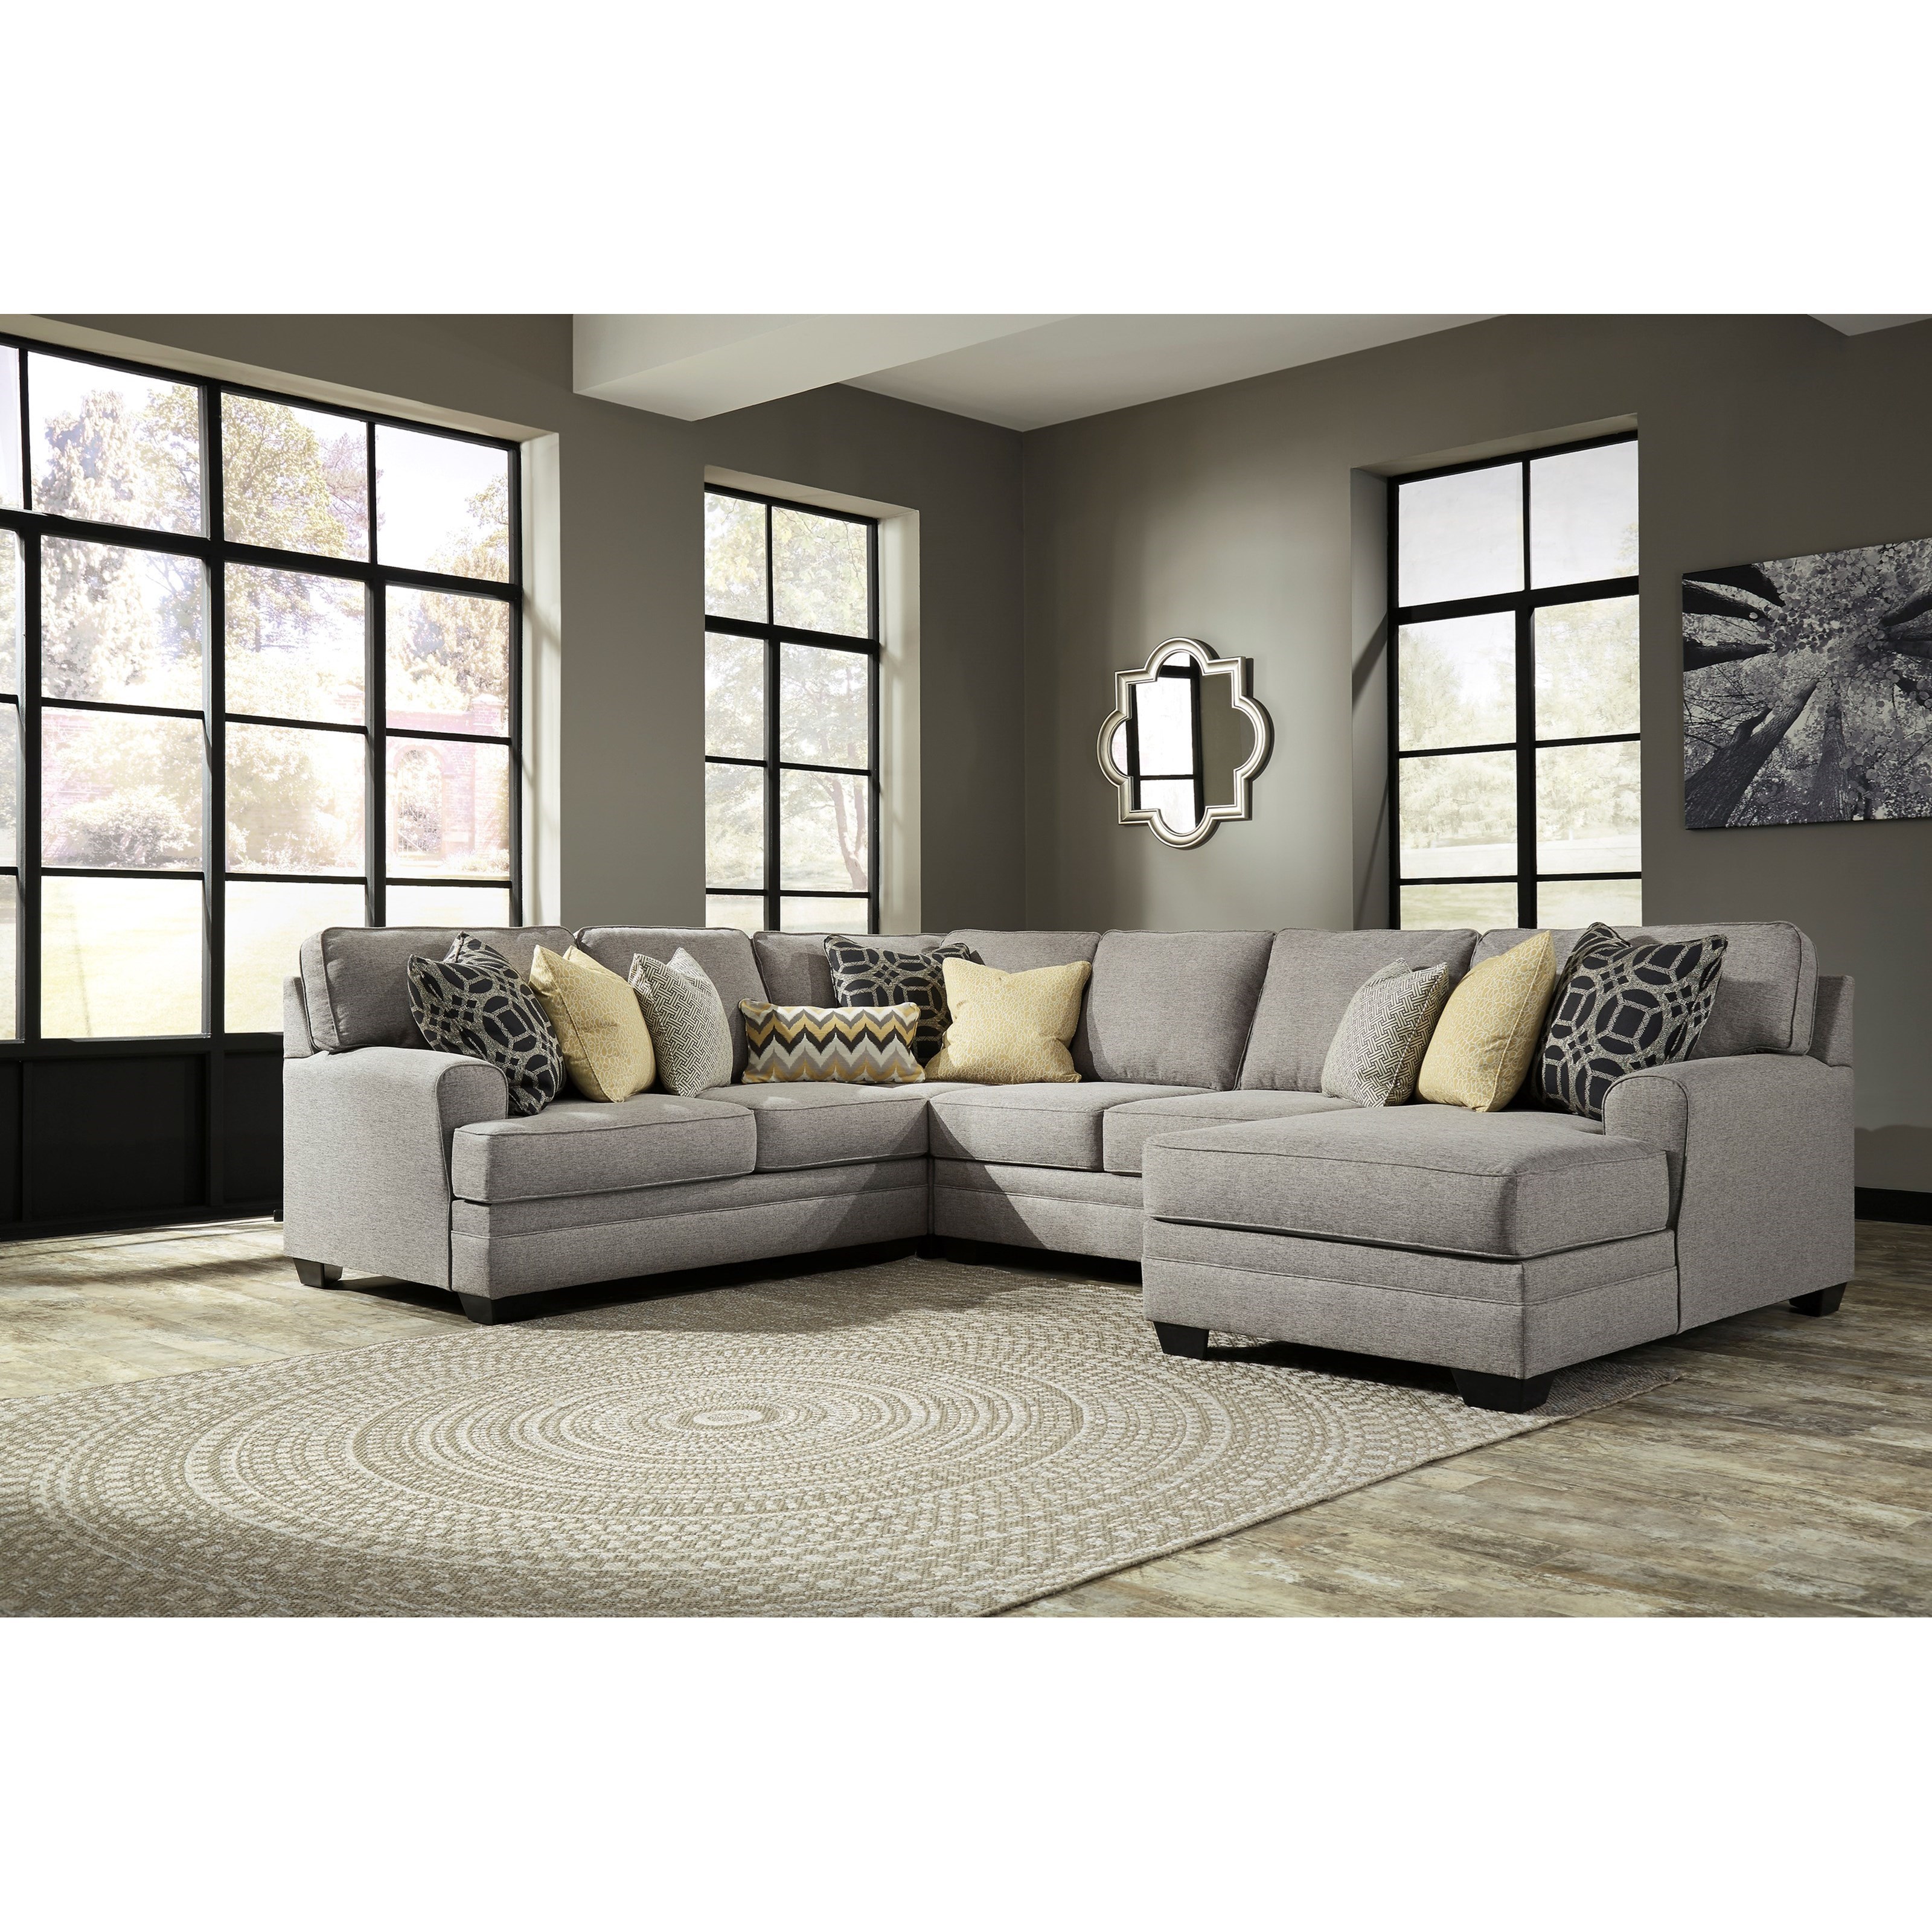 Benchcraft Cresson Contemporary 4-Piece Sectional with Chaise